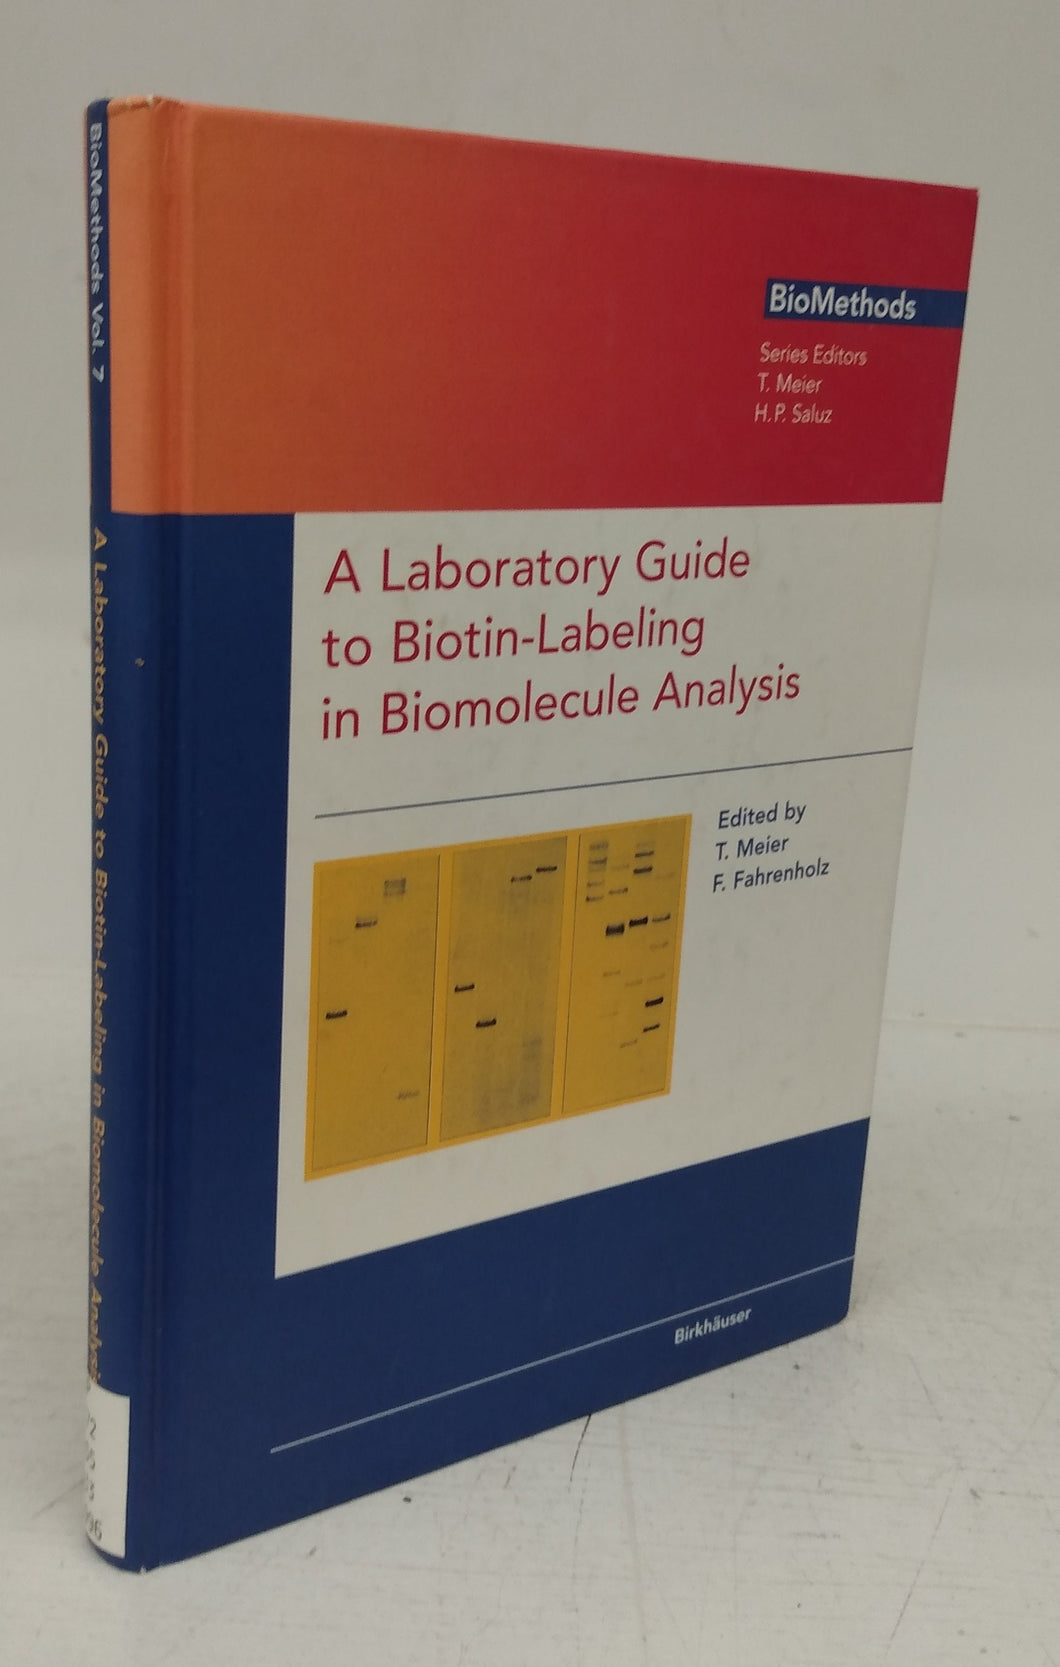 A Laboratory Guide to Biotin-Labeling in Biomolecule Analysis